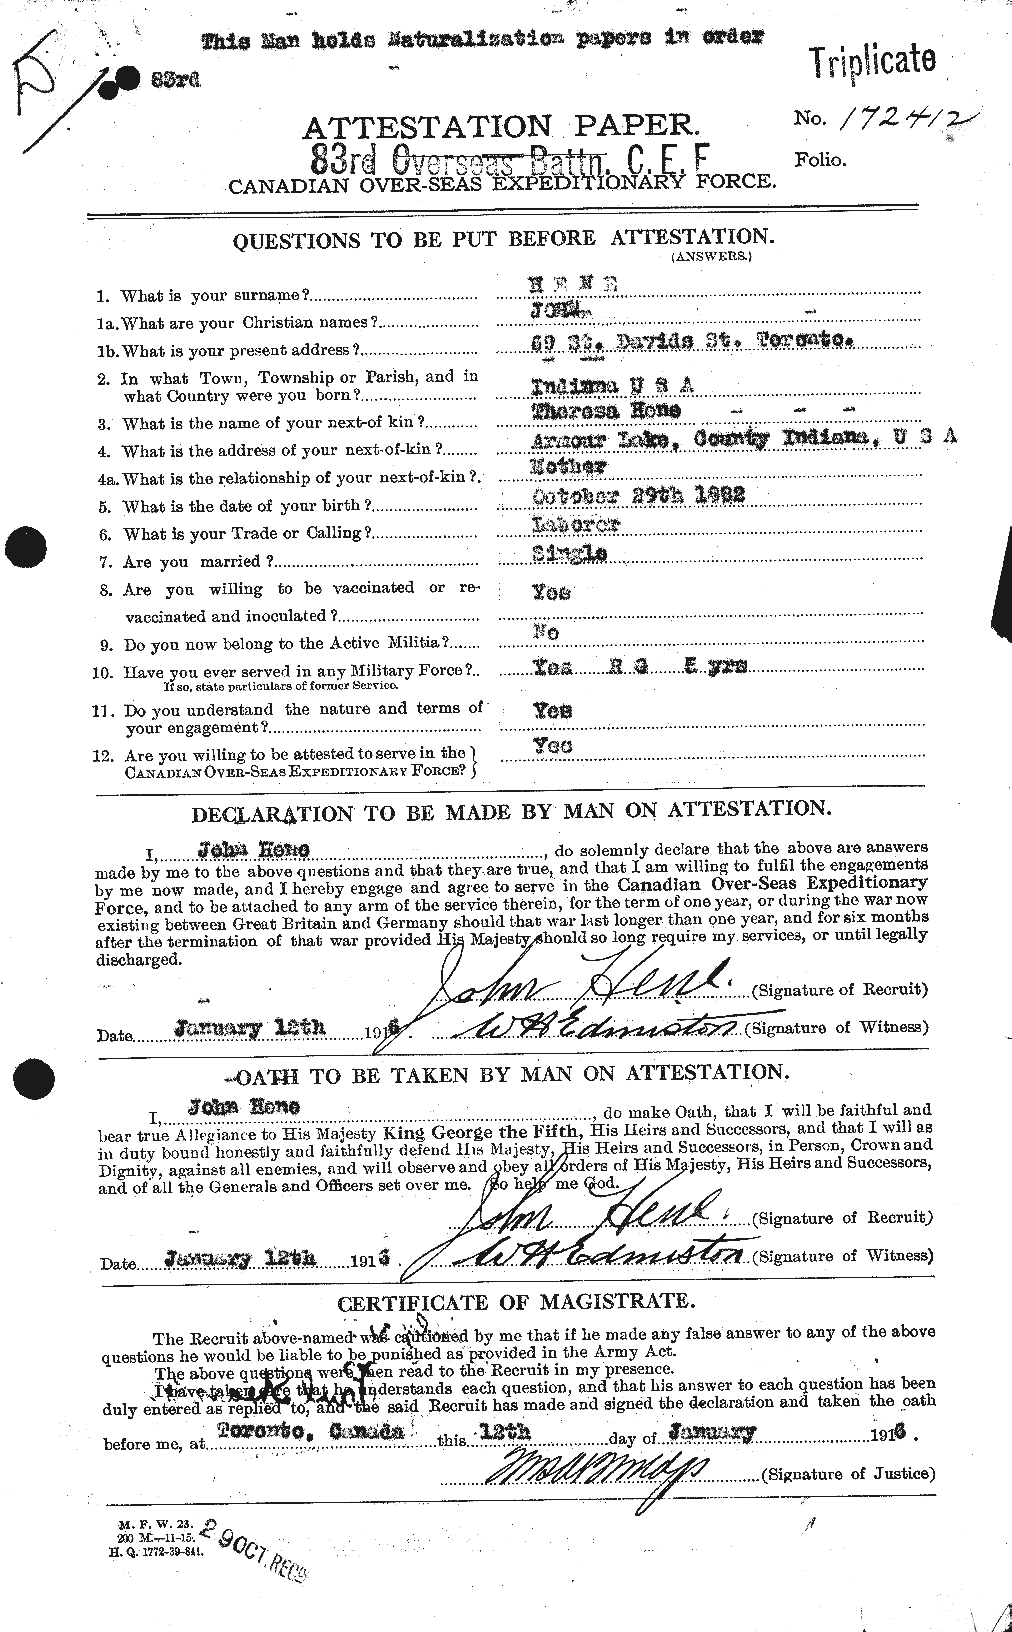 Personnel Records of the First World War - CEF 391362a